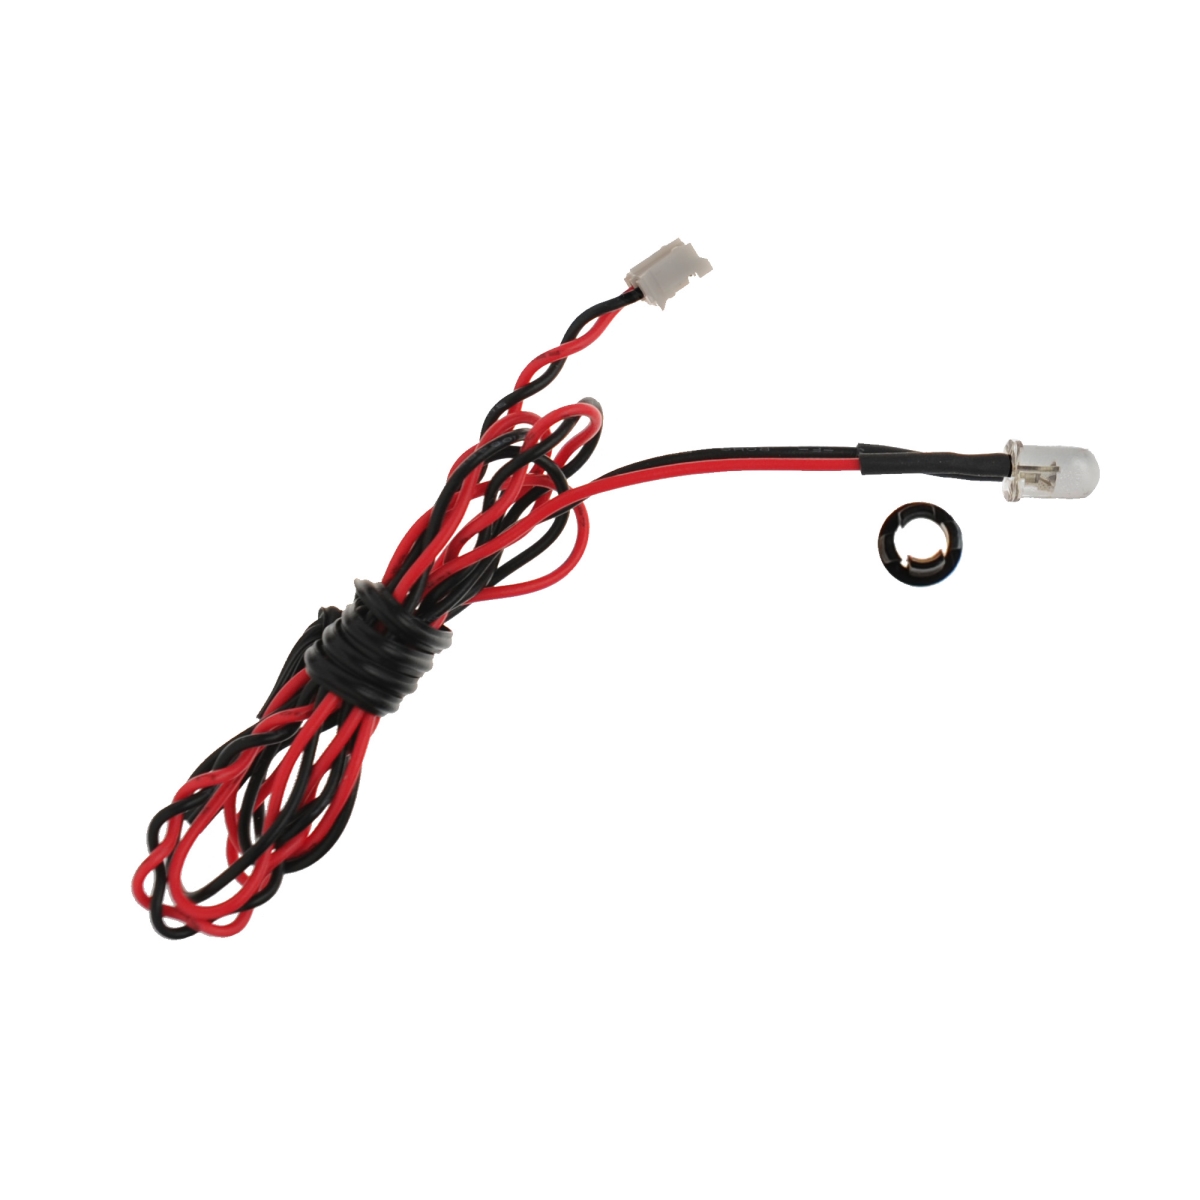 My Trick Rc Mykrsr5 5 Mm 1-led Per Lead, Single Pack - Red